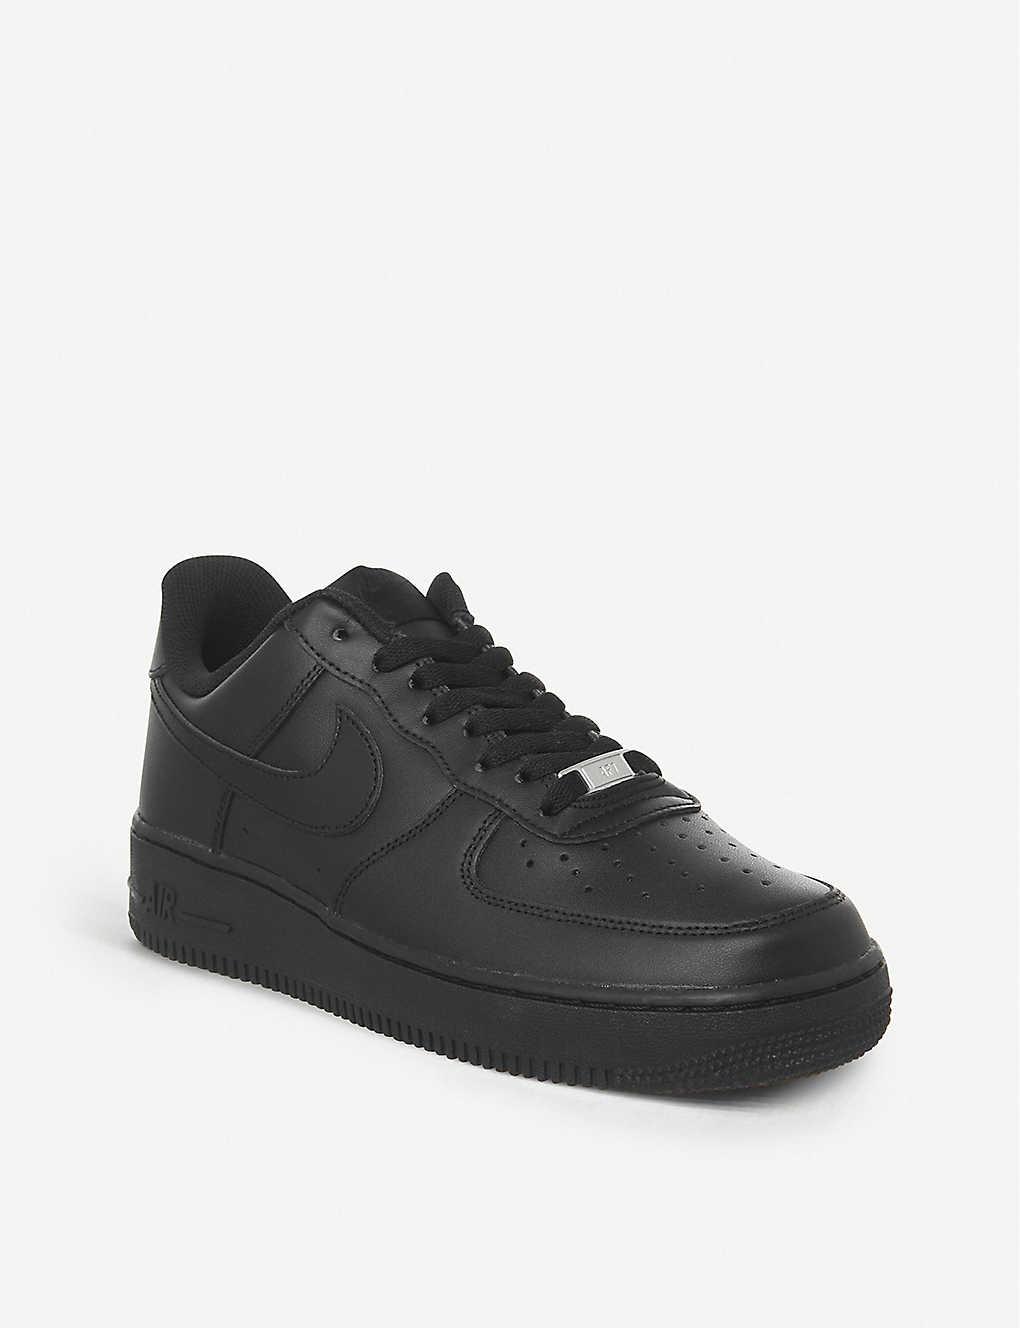 Nike Leather Air Force One Low Sneakers in Black Black (Black) for Men ...